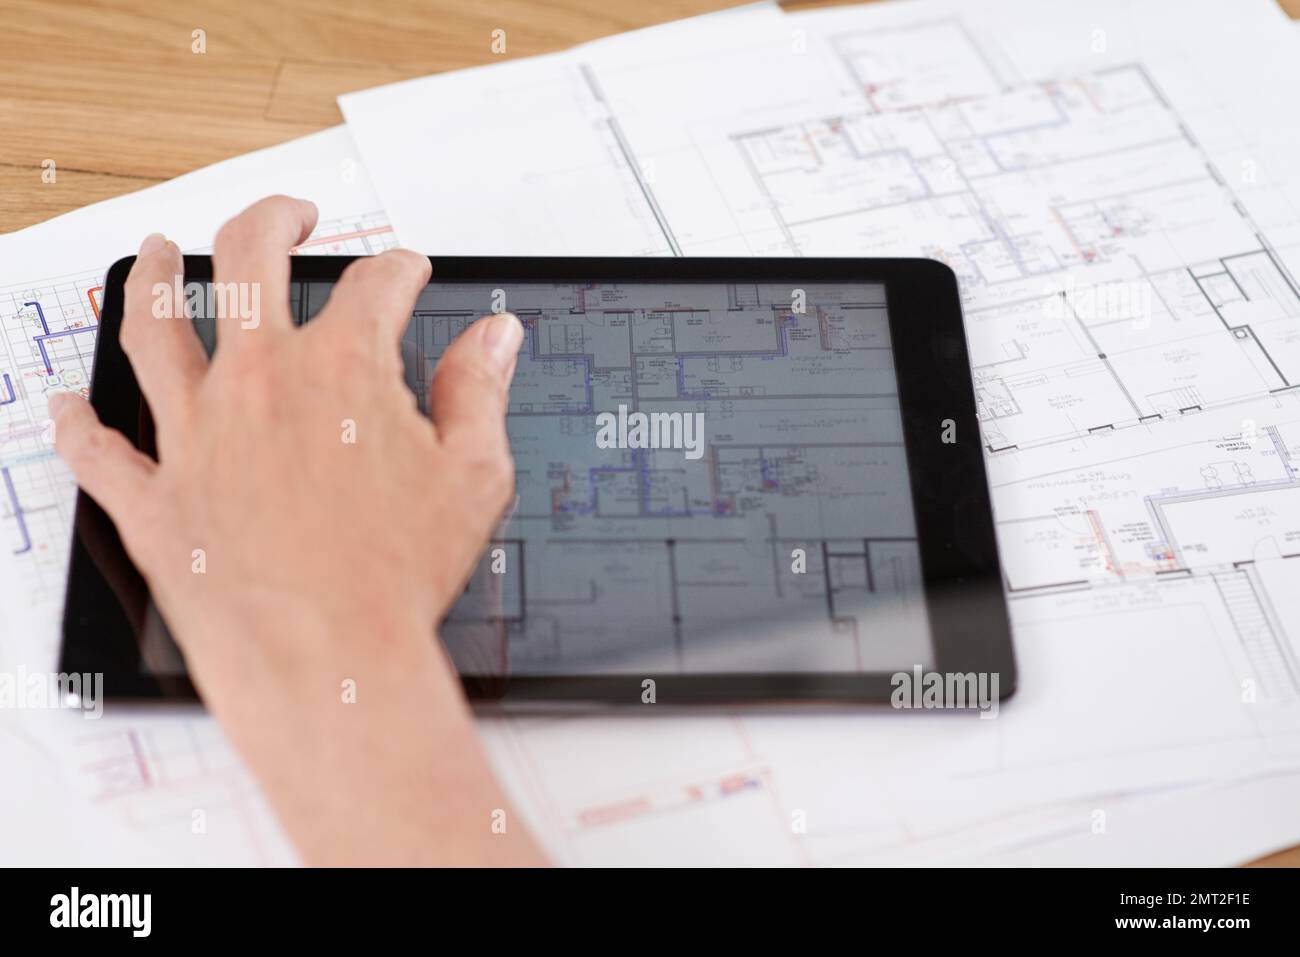 Architecture meets technology. Cropped image of an architect working on building plans on her digital tablet. Stock Photo